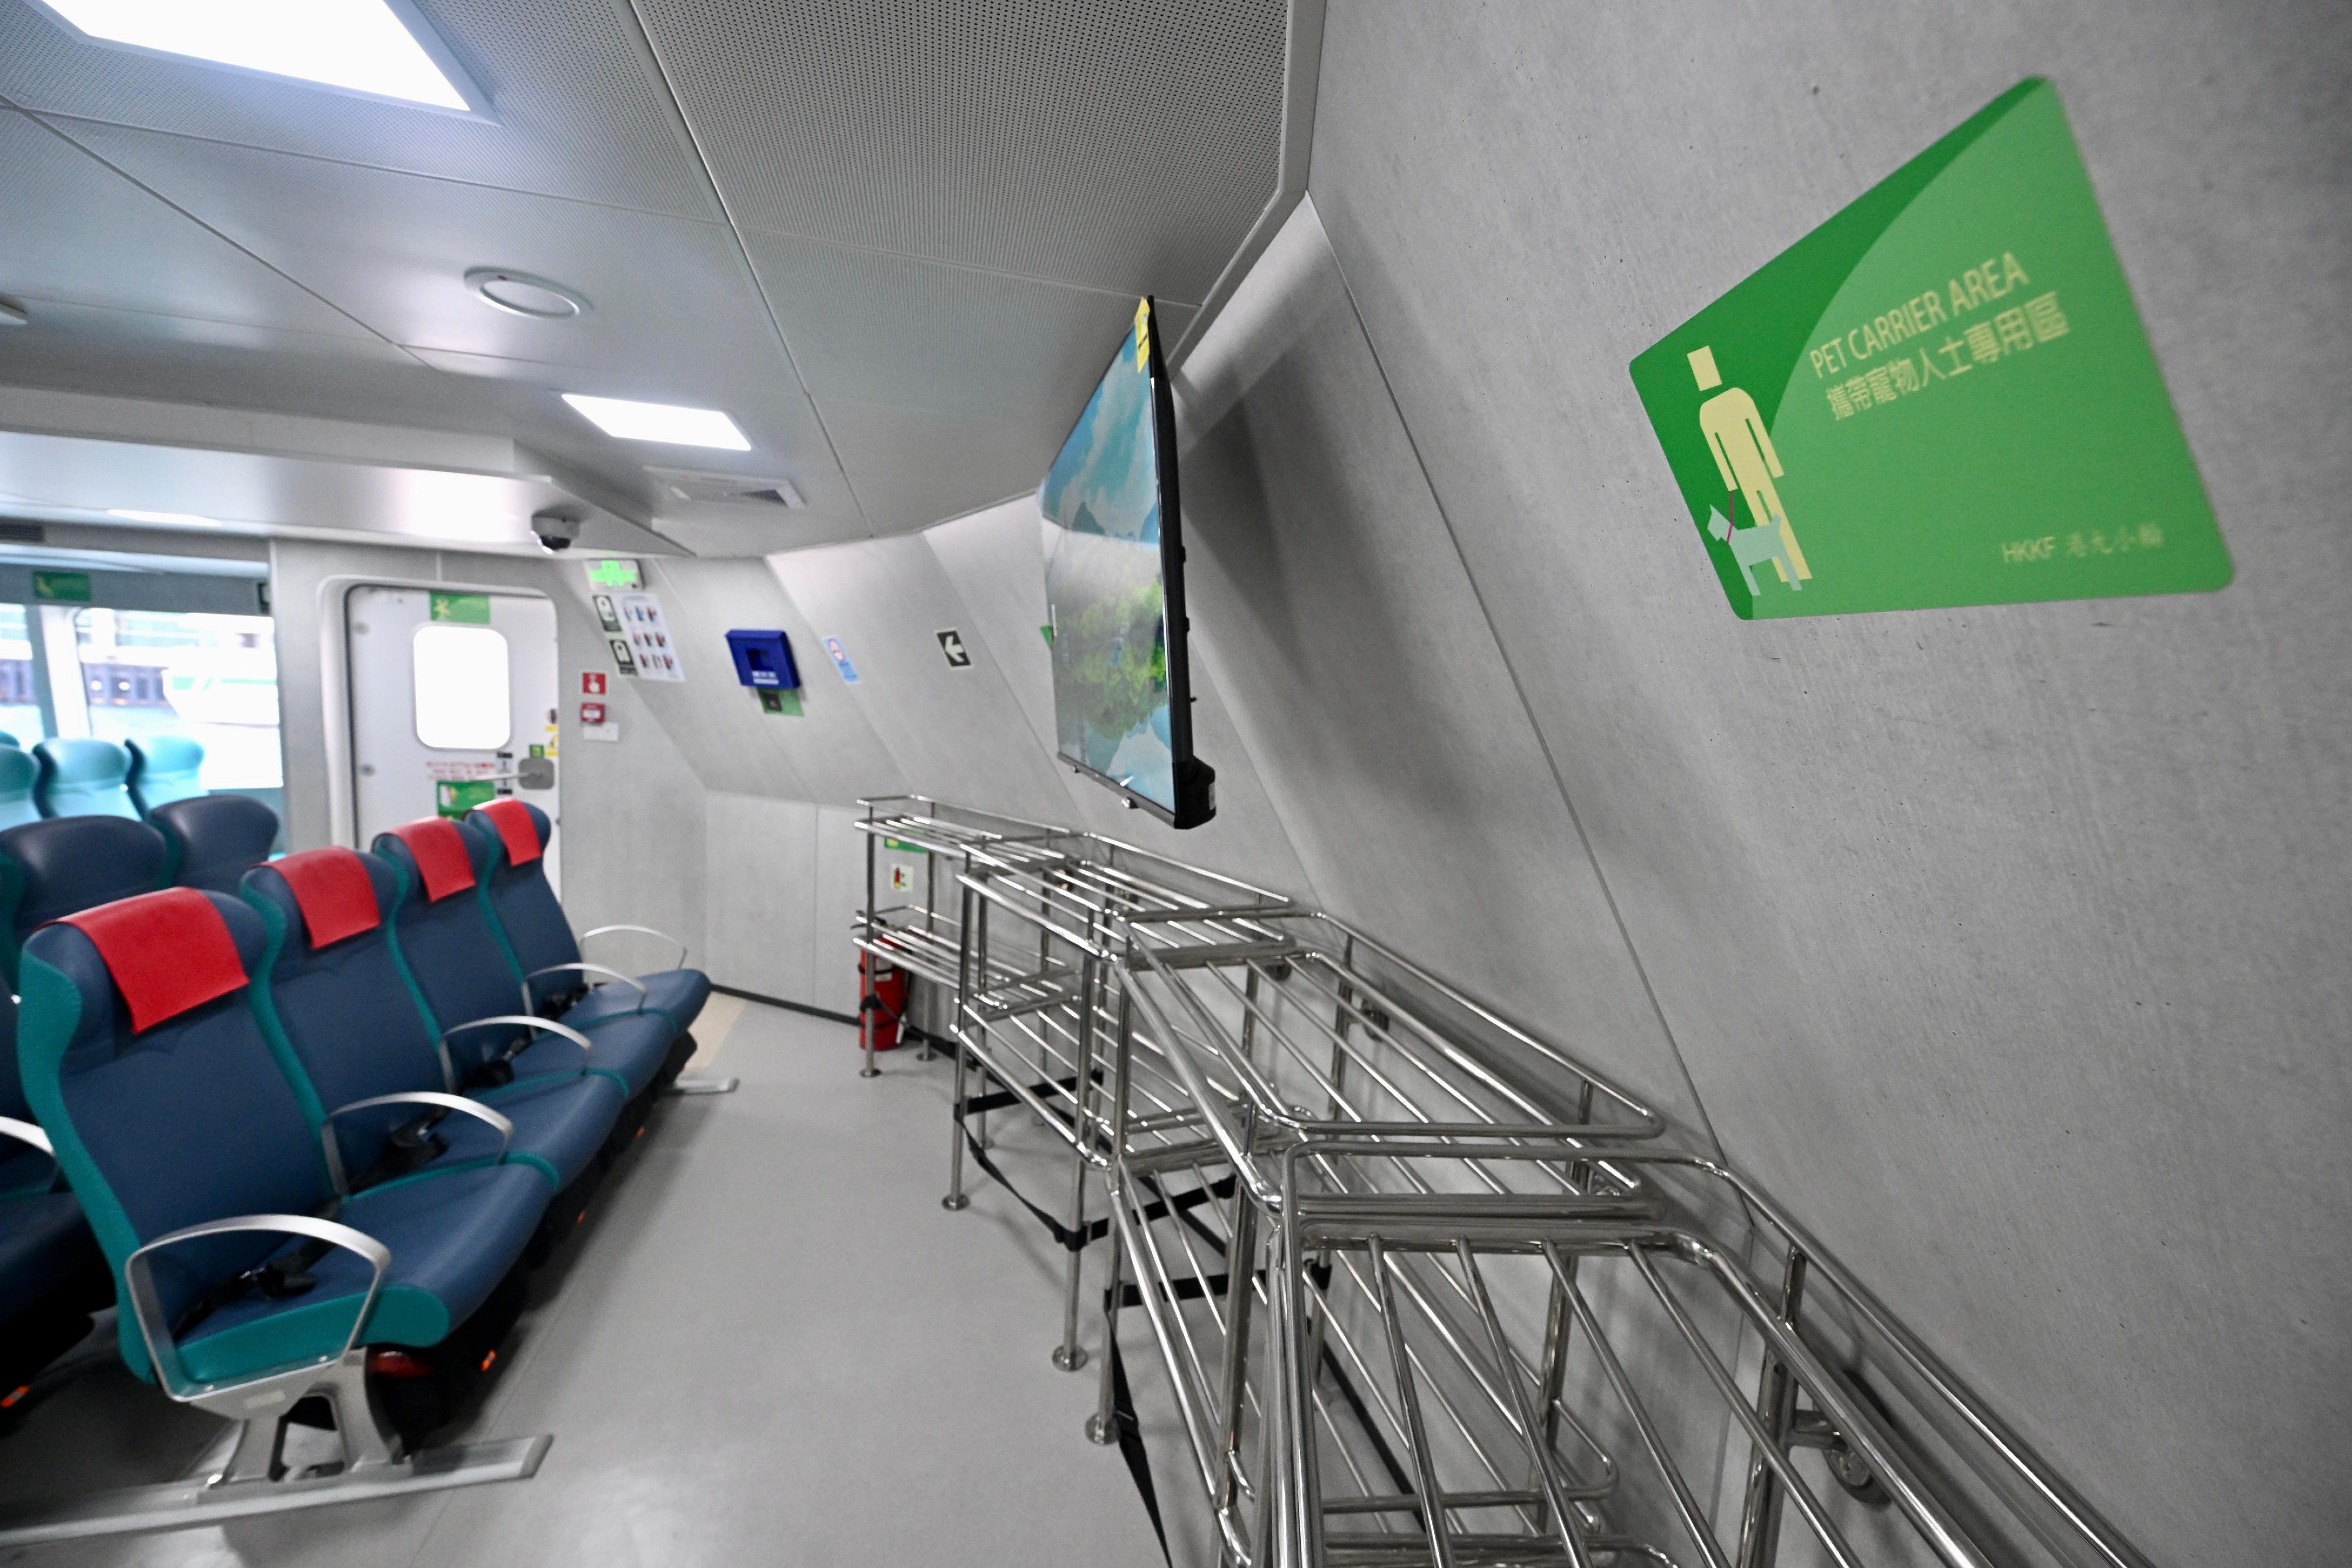 The Transport Department announced today (February 27) that the first batch of three fully government-subsidised new vessels procured under Phase I of the Vessel Subsidy Scheme will be gradually deployed to provide services from March this year. Photo shows the dedicated seats on a new vessel for passengers with pets.